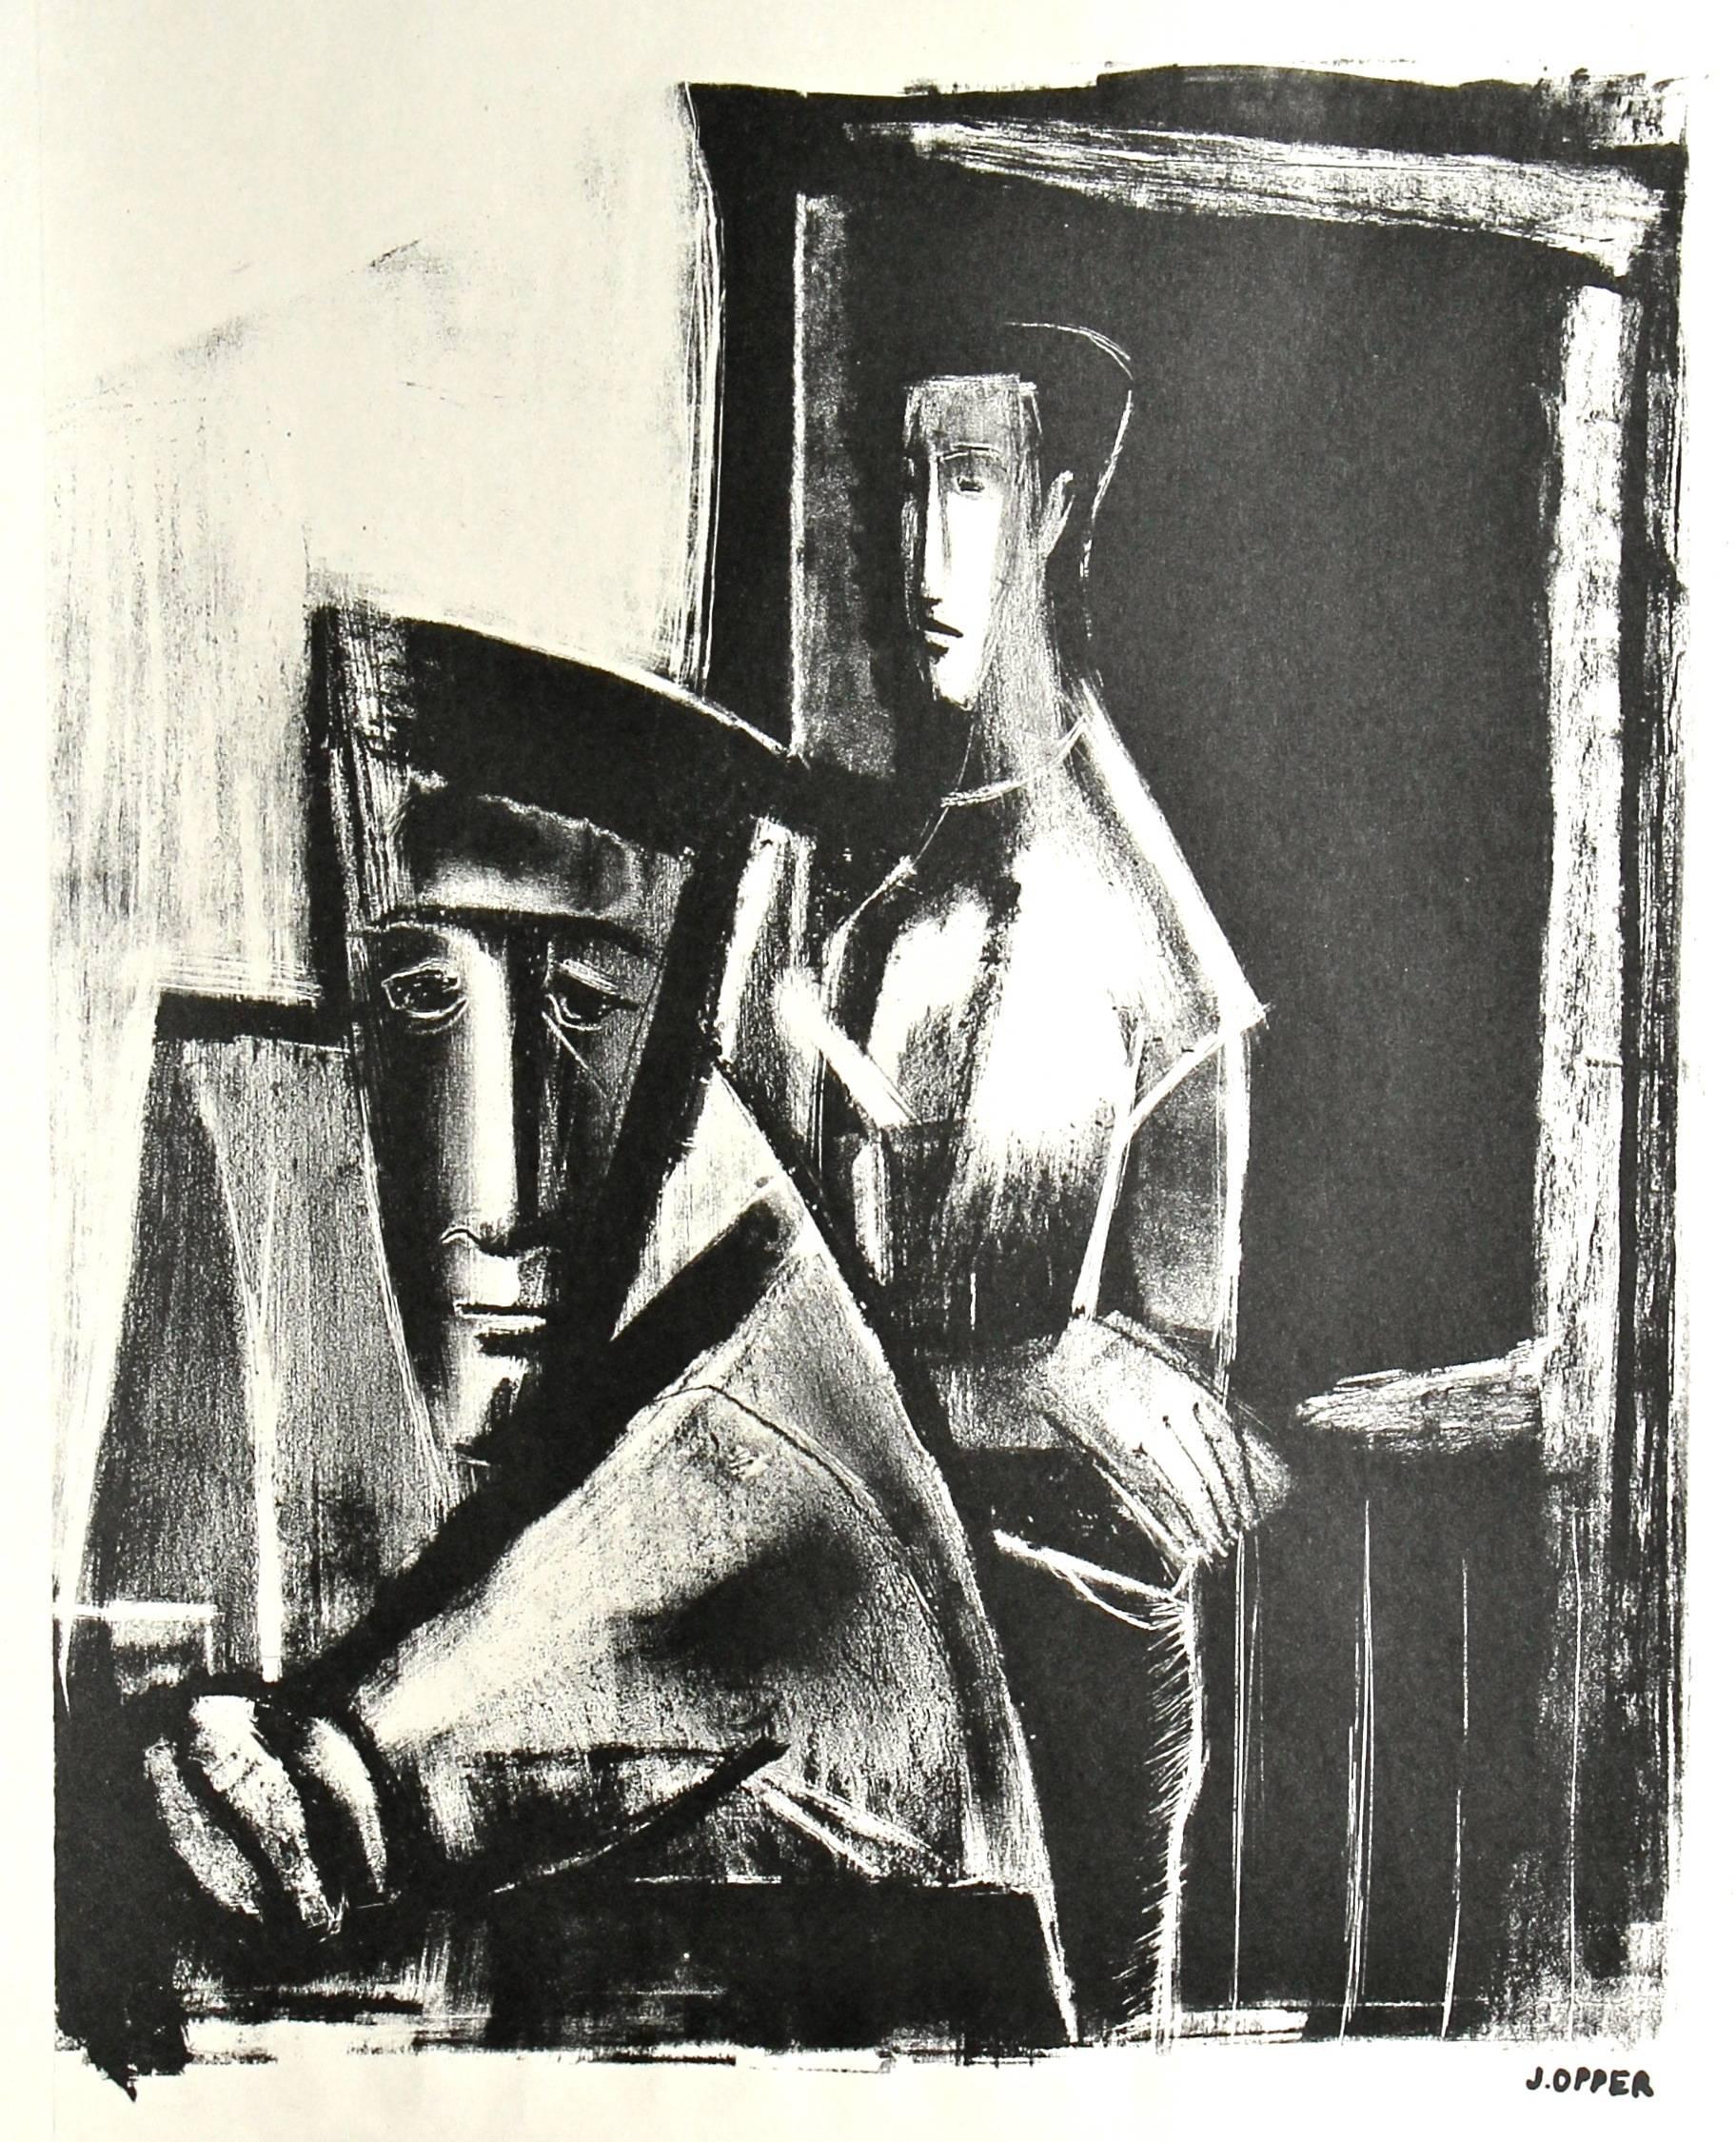 Jerry Opper Interior Print - Monochromatic Expressionist Lithograph